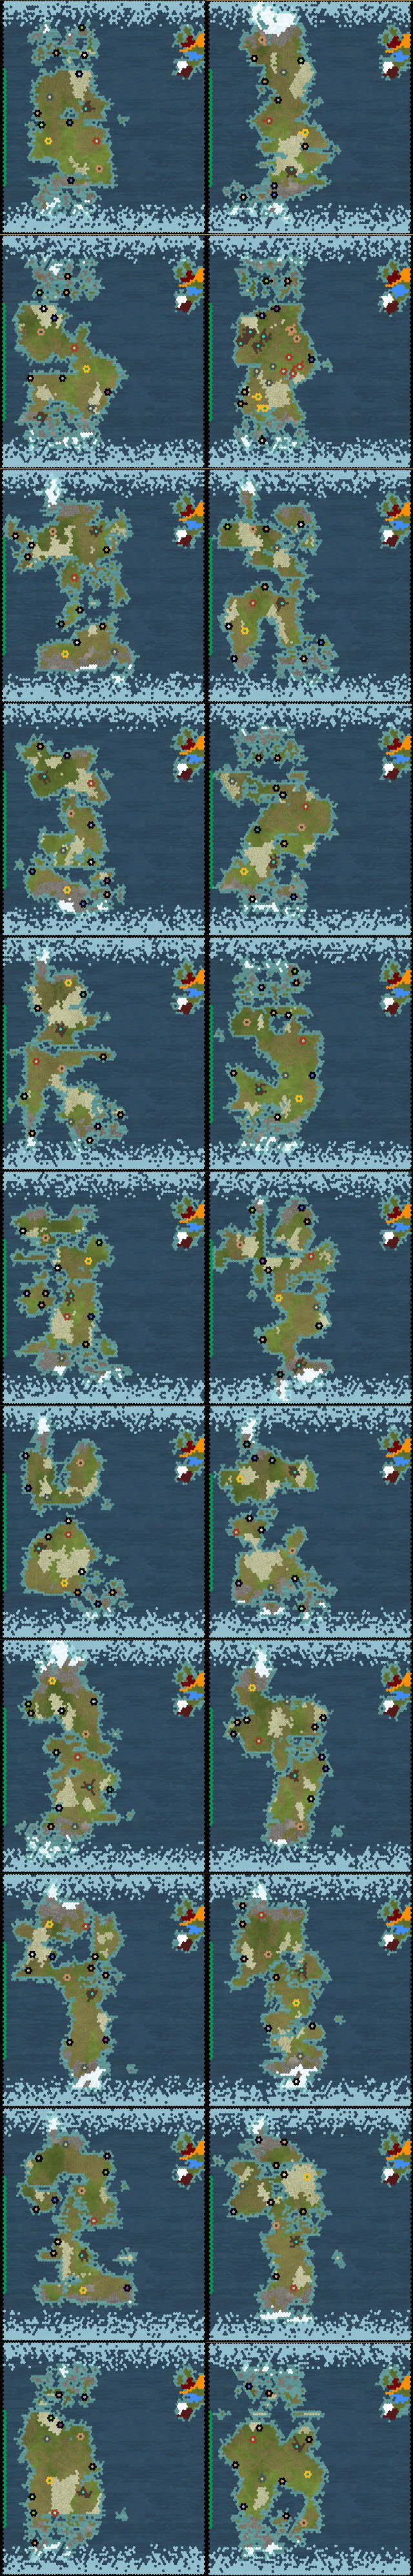 Conquest of the New World League of Extraordinary Hoyanehs Steam Achievement - Failed Maps